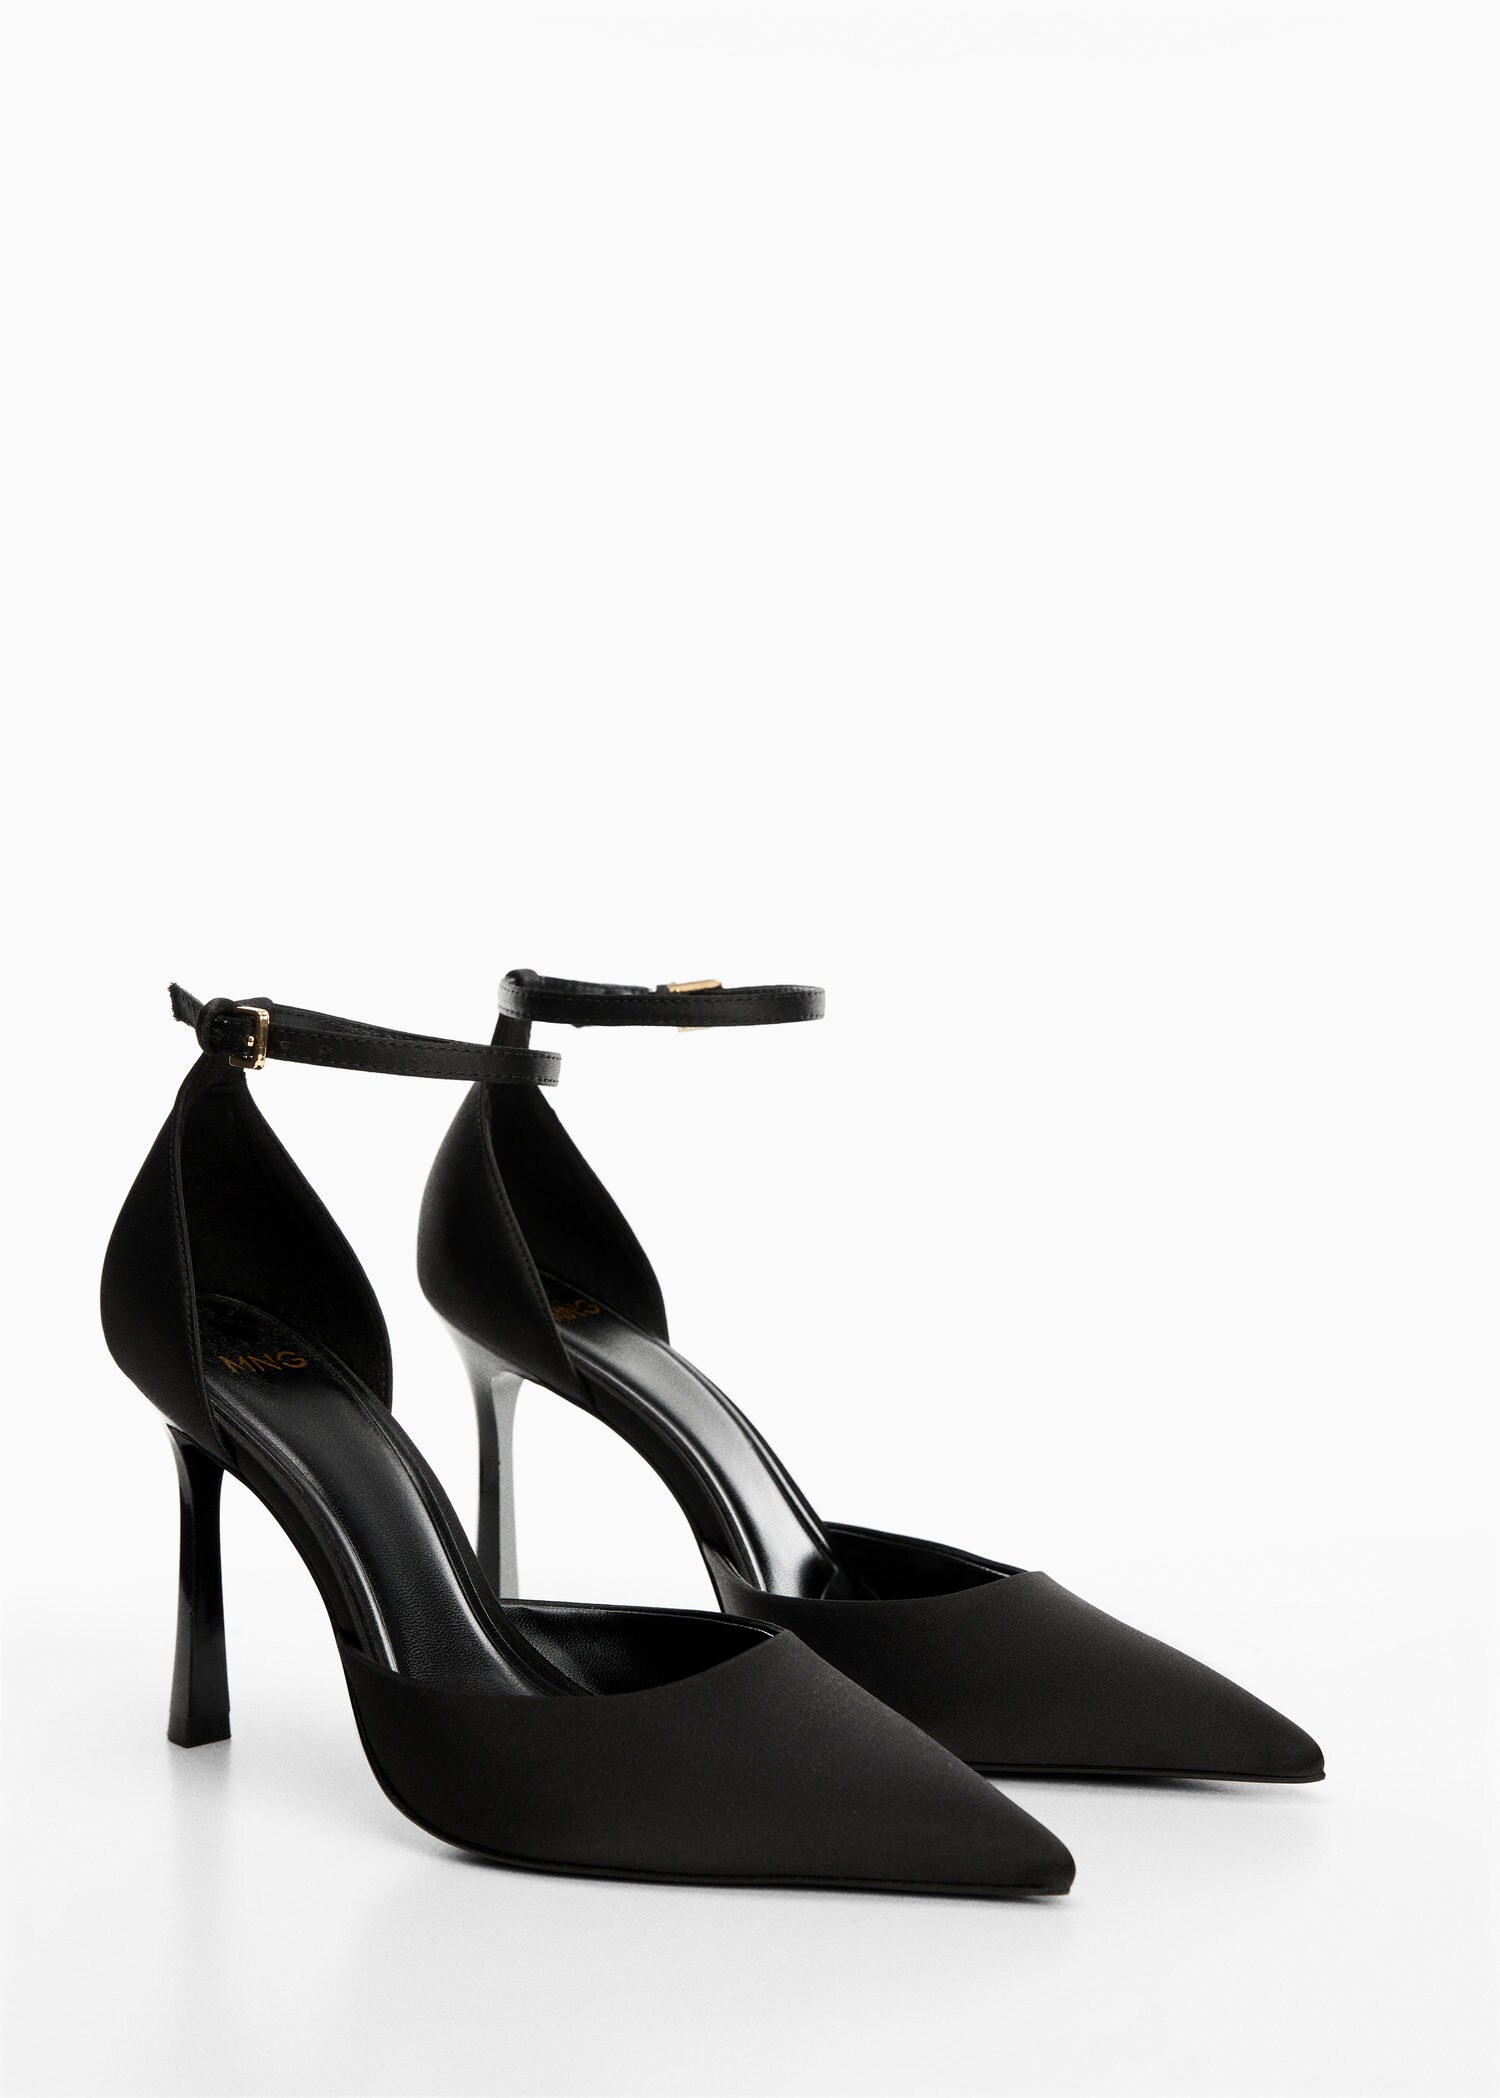 Ankle-cuff heel shoes